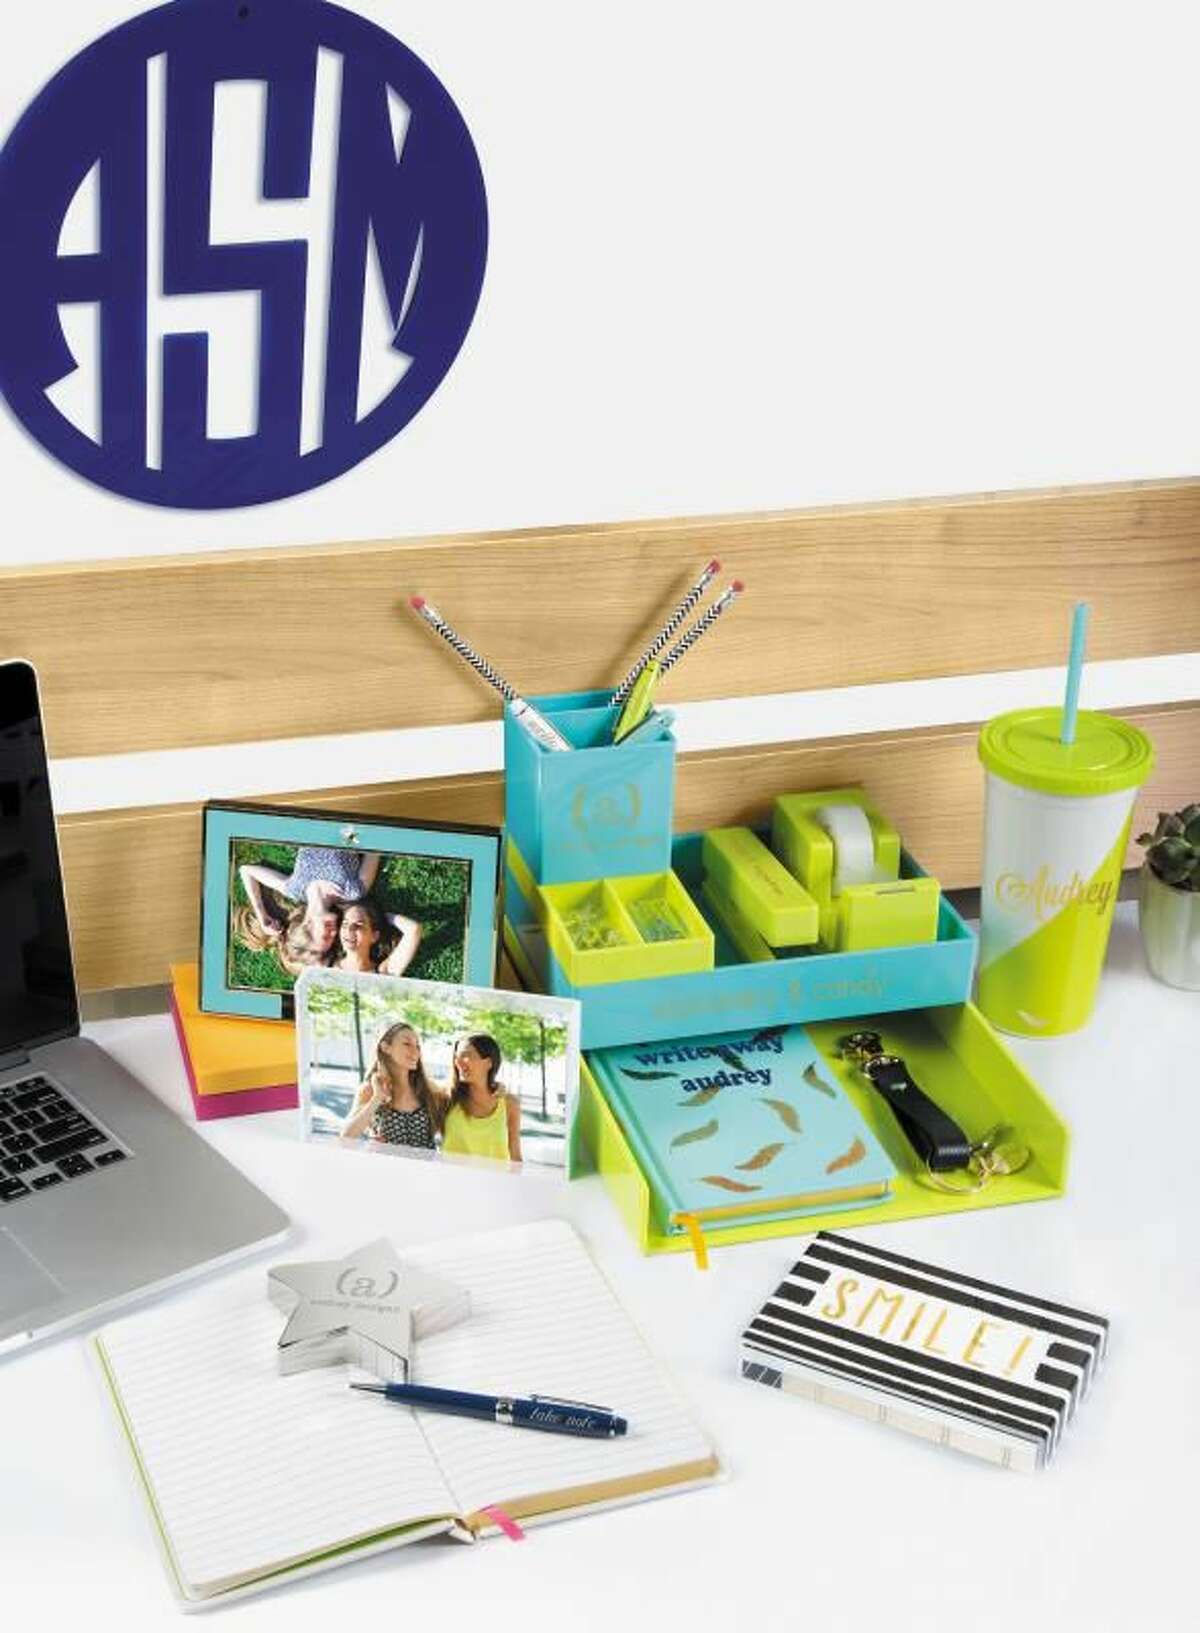 Gifts that help new grads personalize their work space can be stylish and thoughtful.